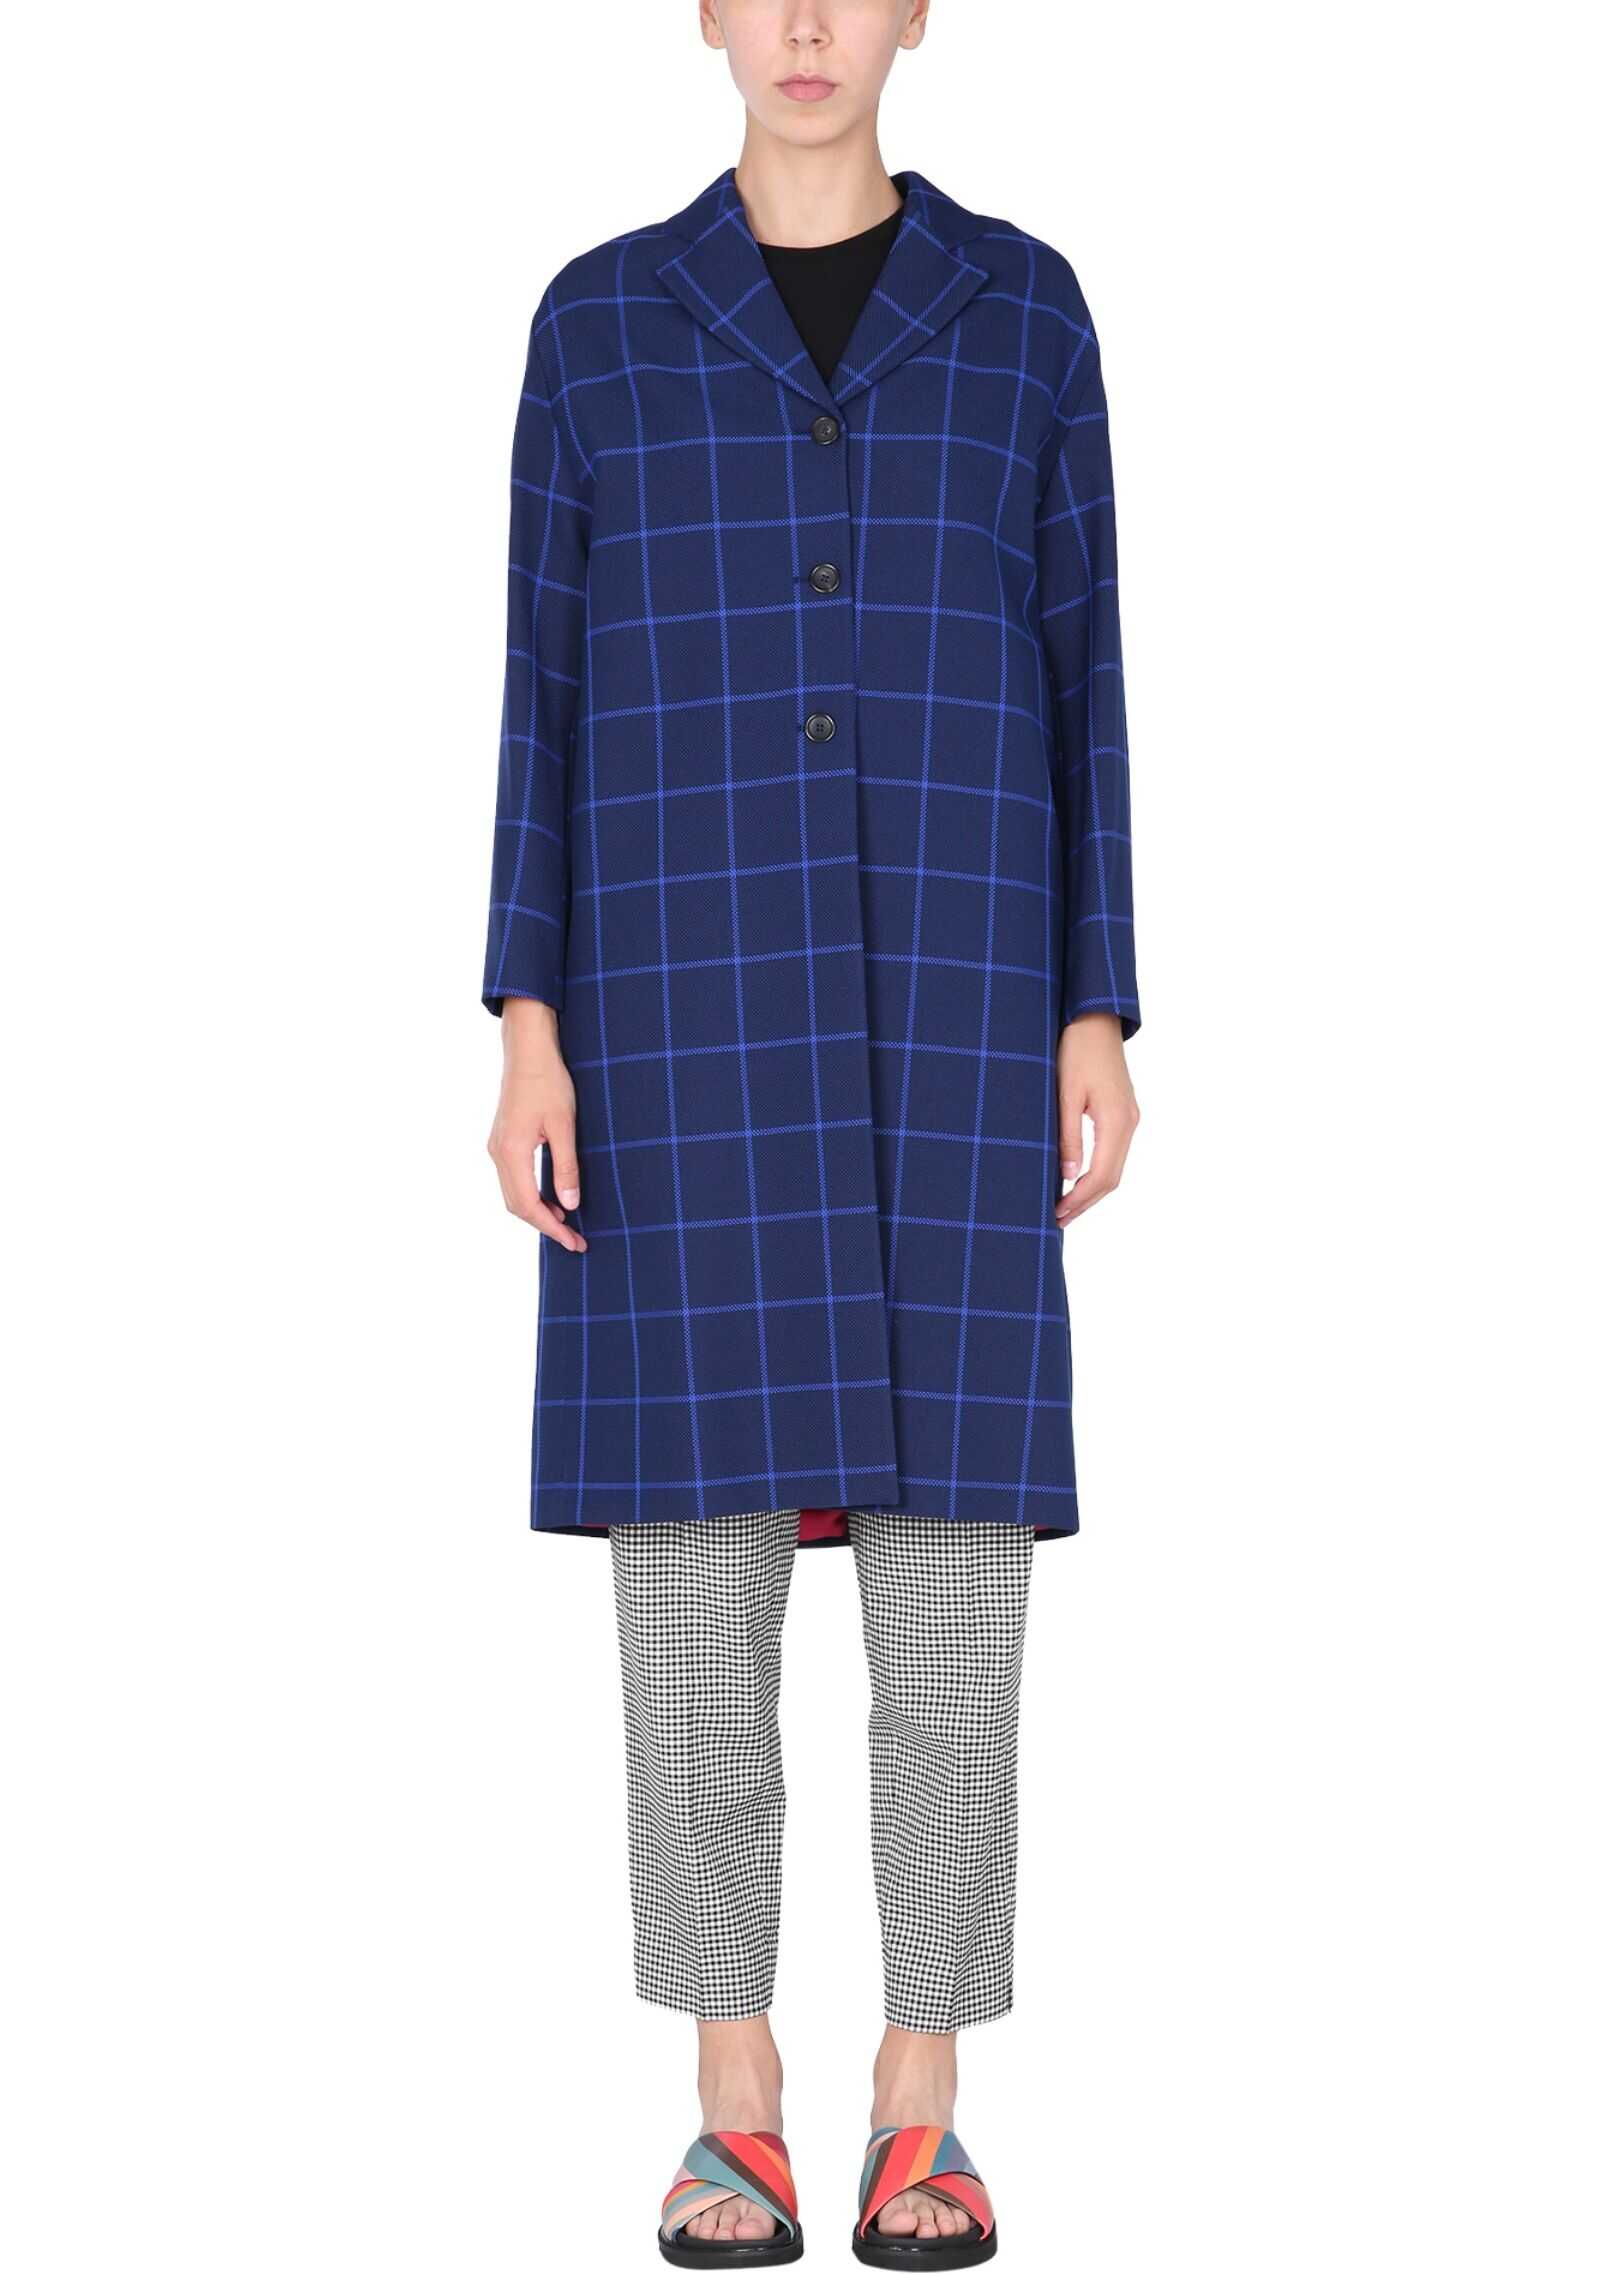 PS by Paul Smith Single-Breasted Coat W2R/196C/G30742_47 BLUE